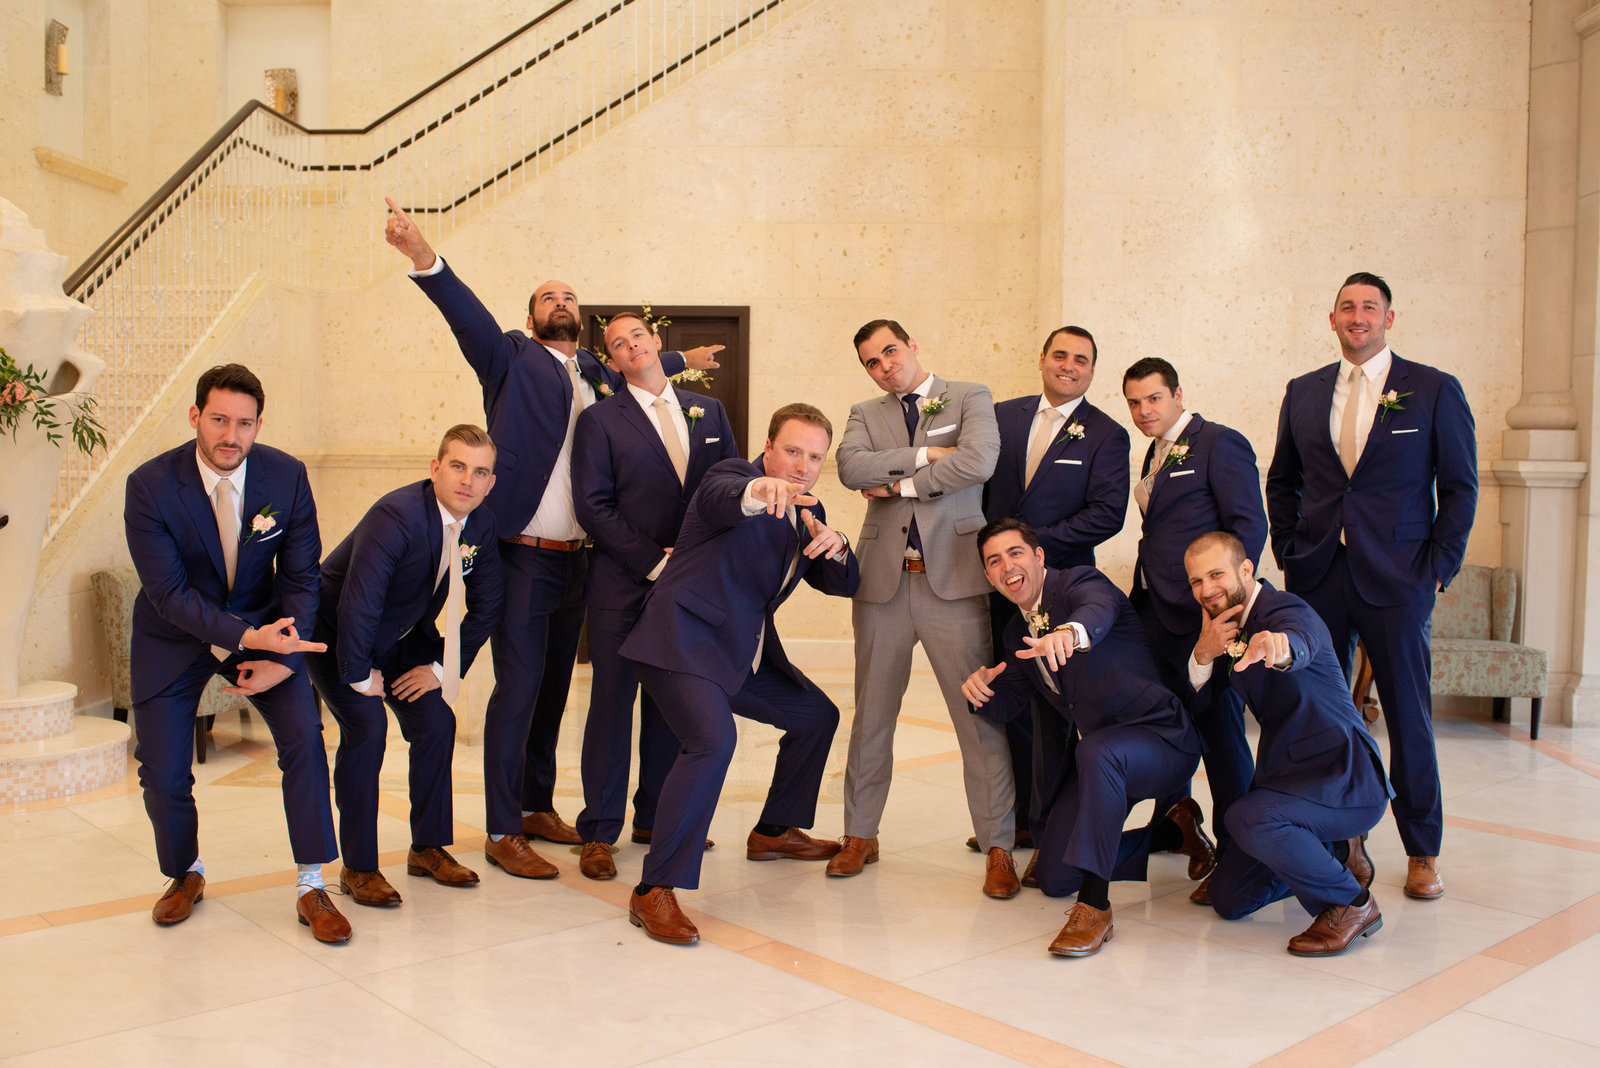 Groom and groomsmen posing at Atlantis Banquet and Events